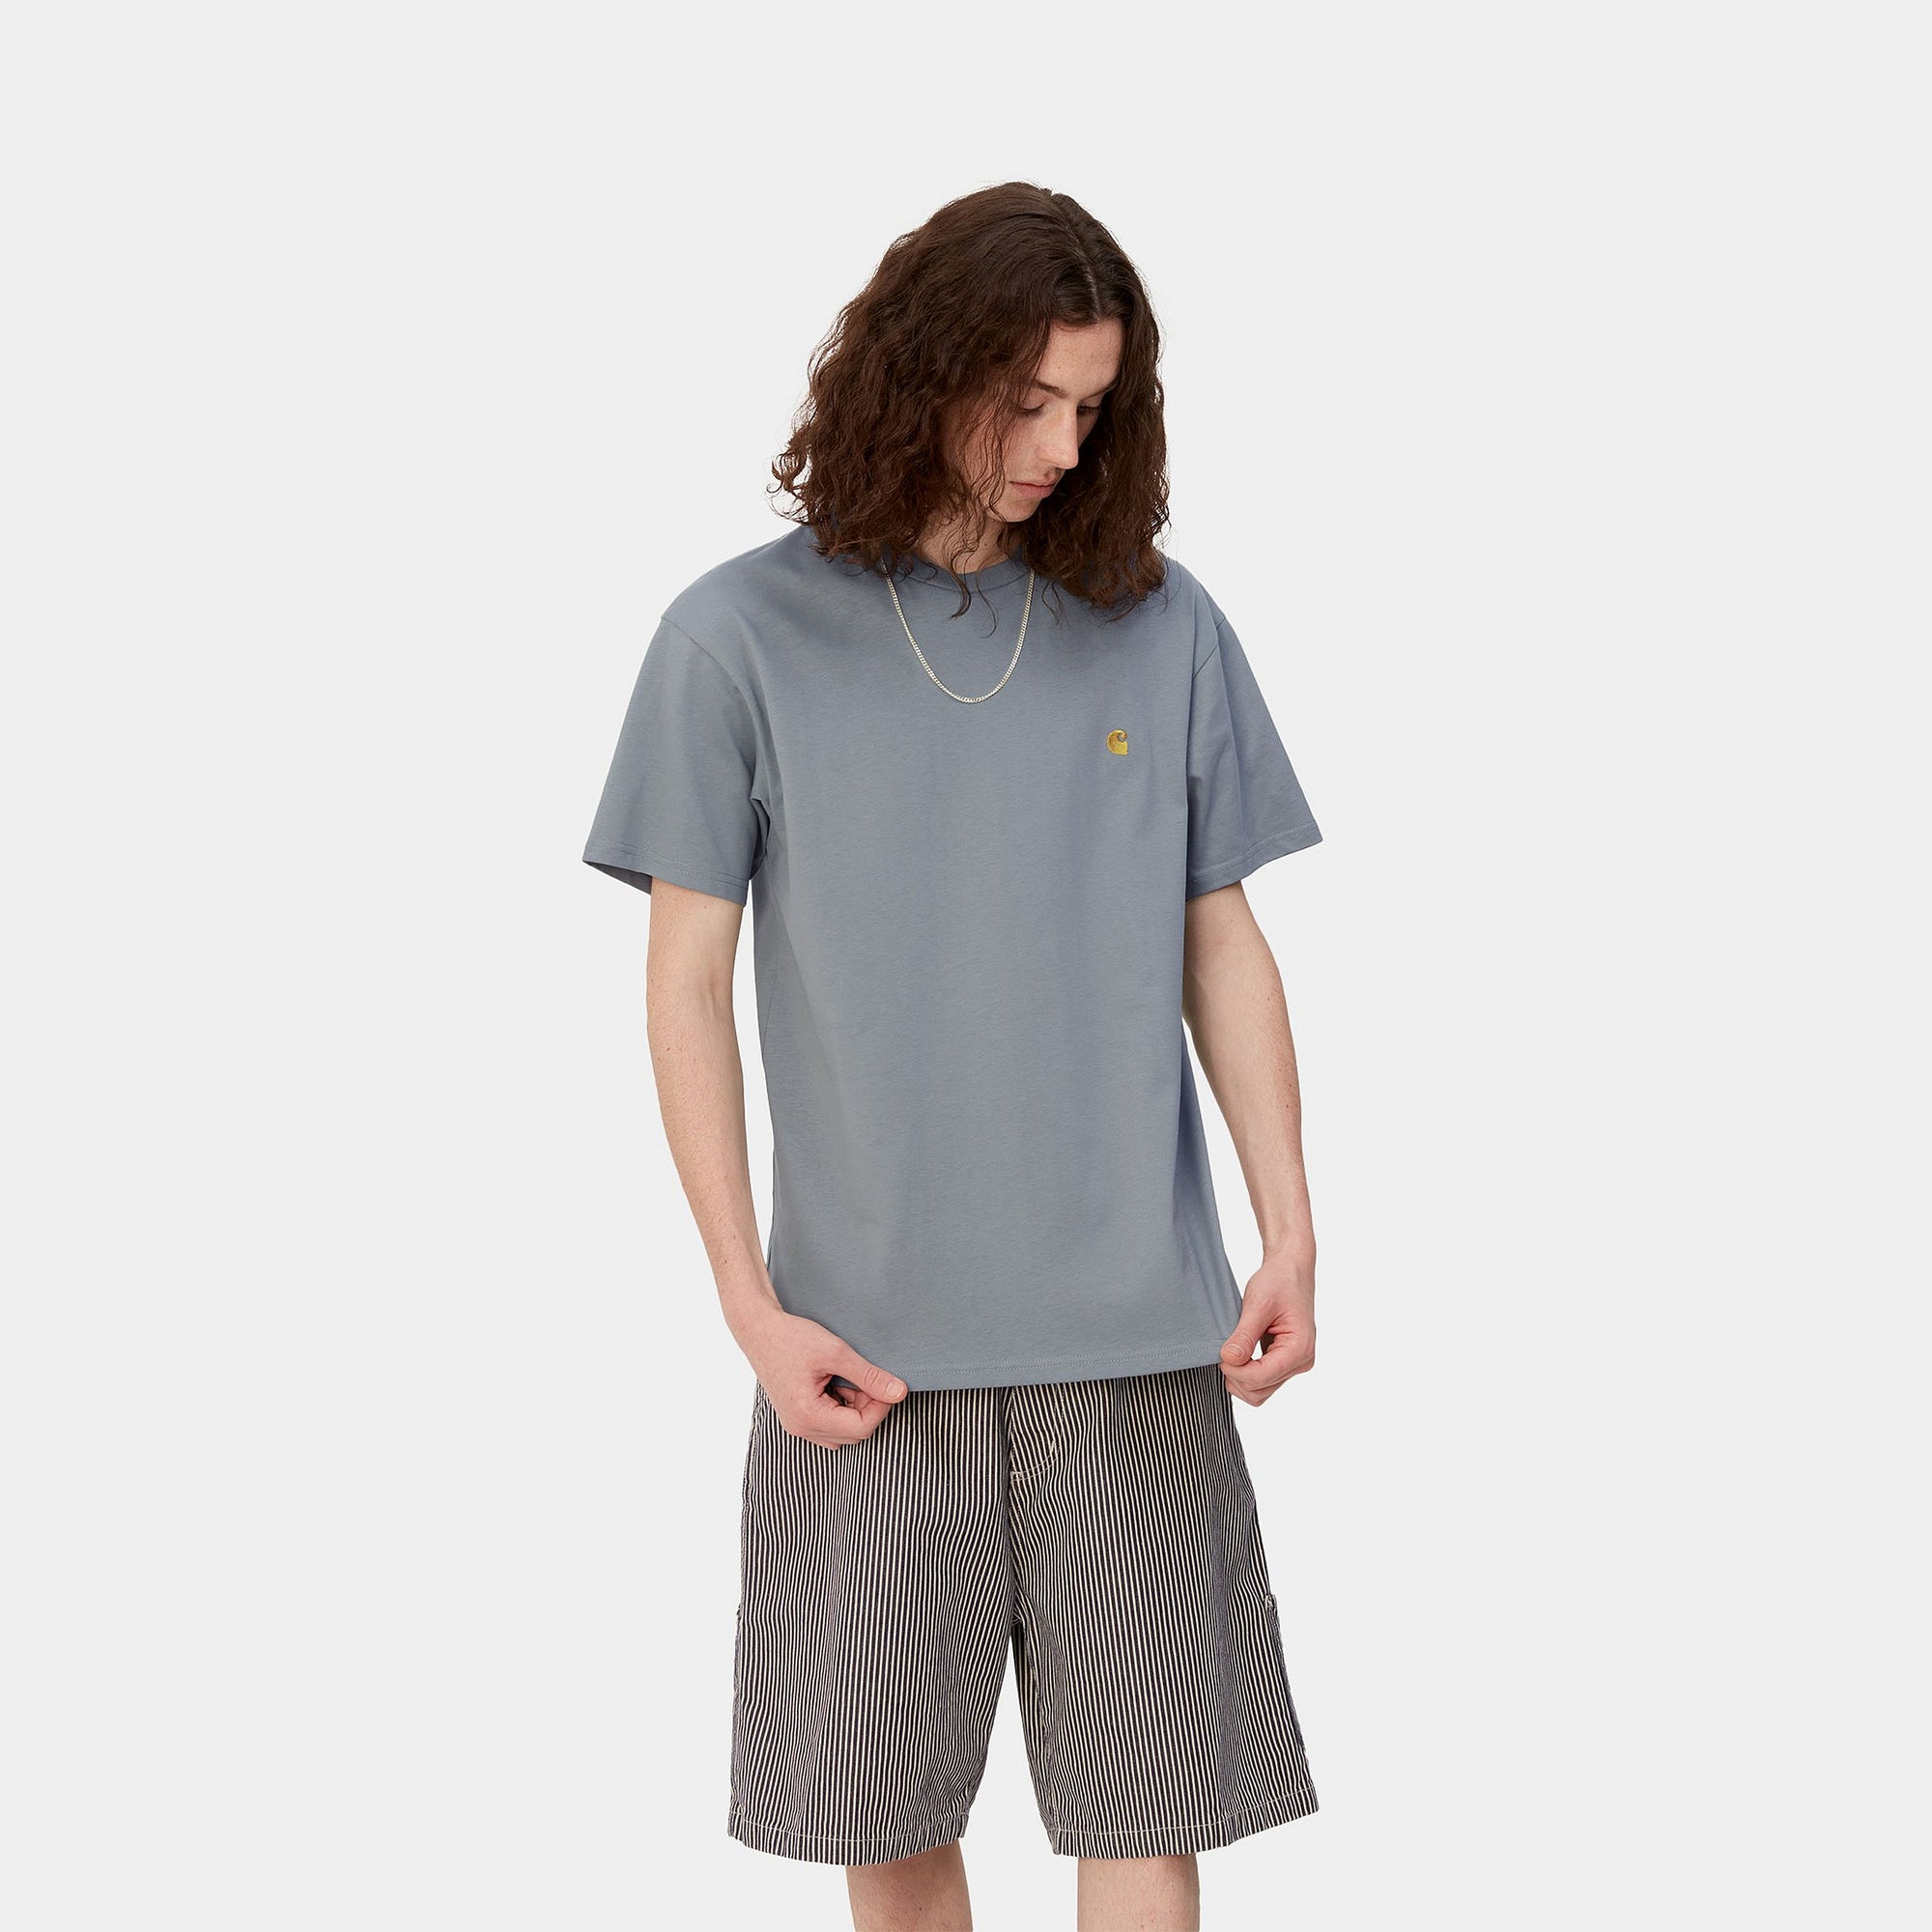 Carhartt WIP S/S Chase T-Shirt (mirror/gold) - Blue Mountain Store